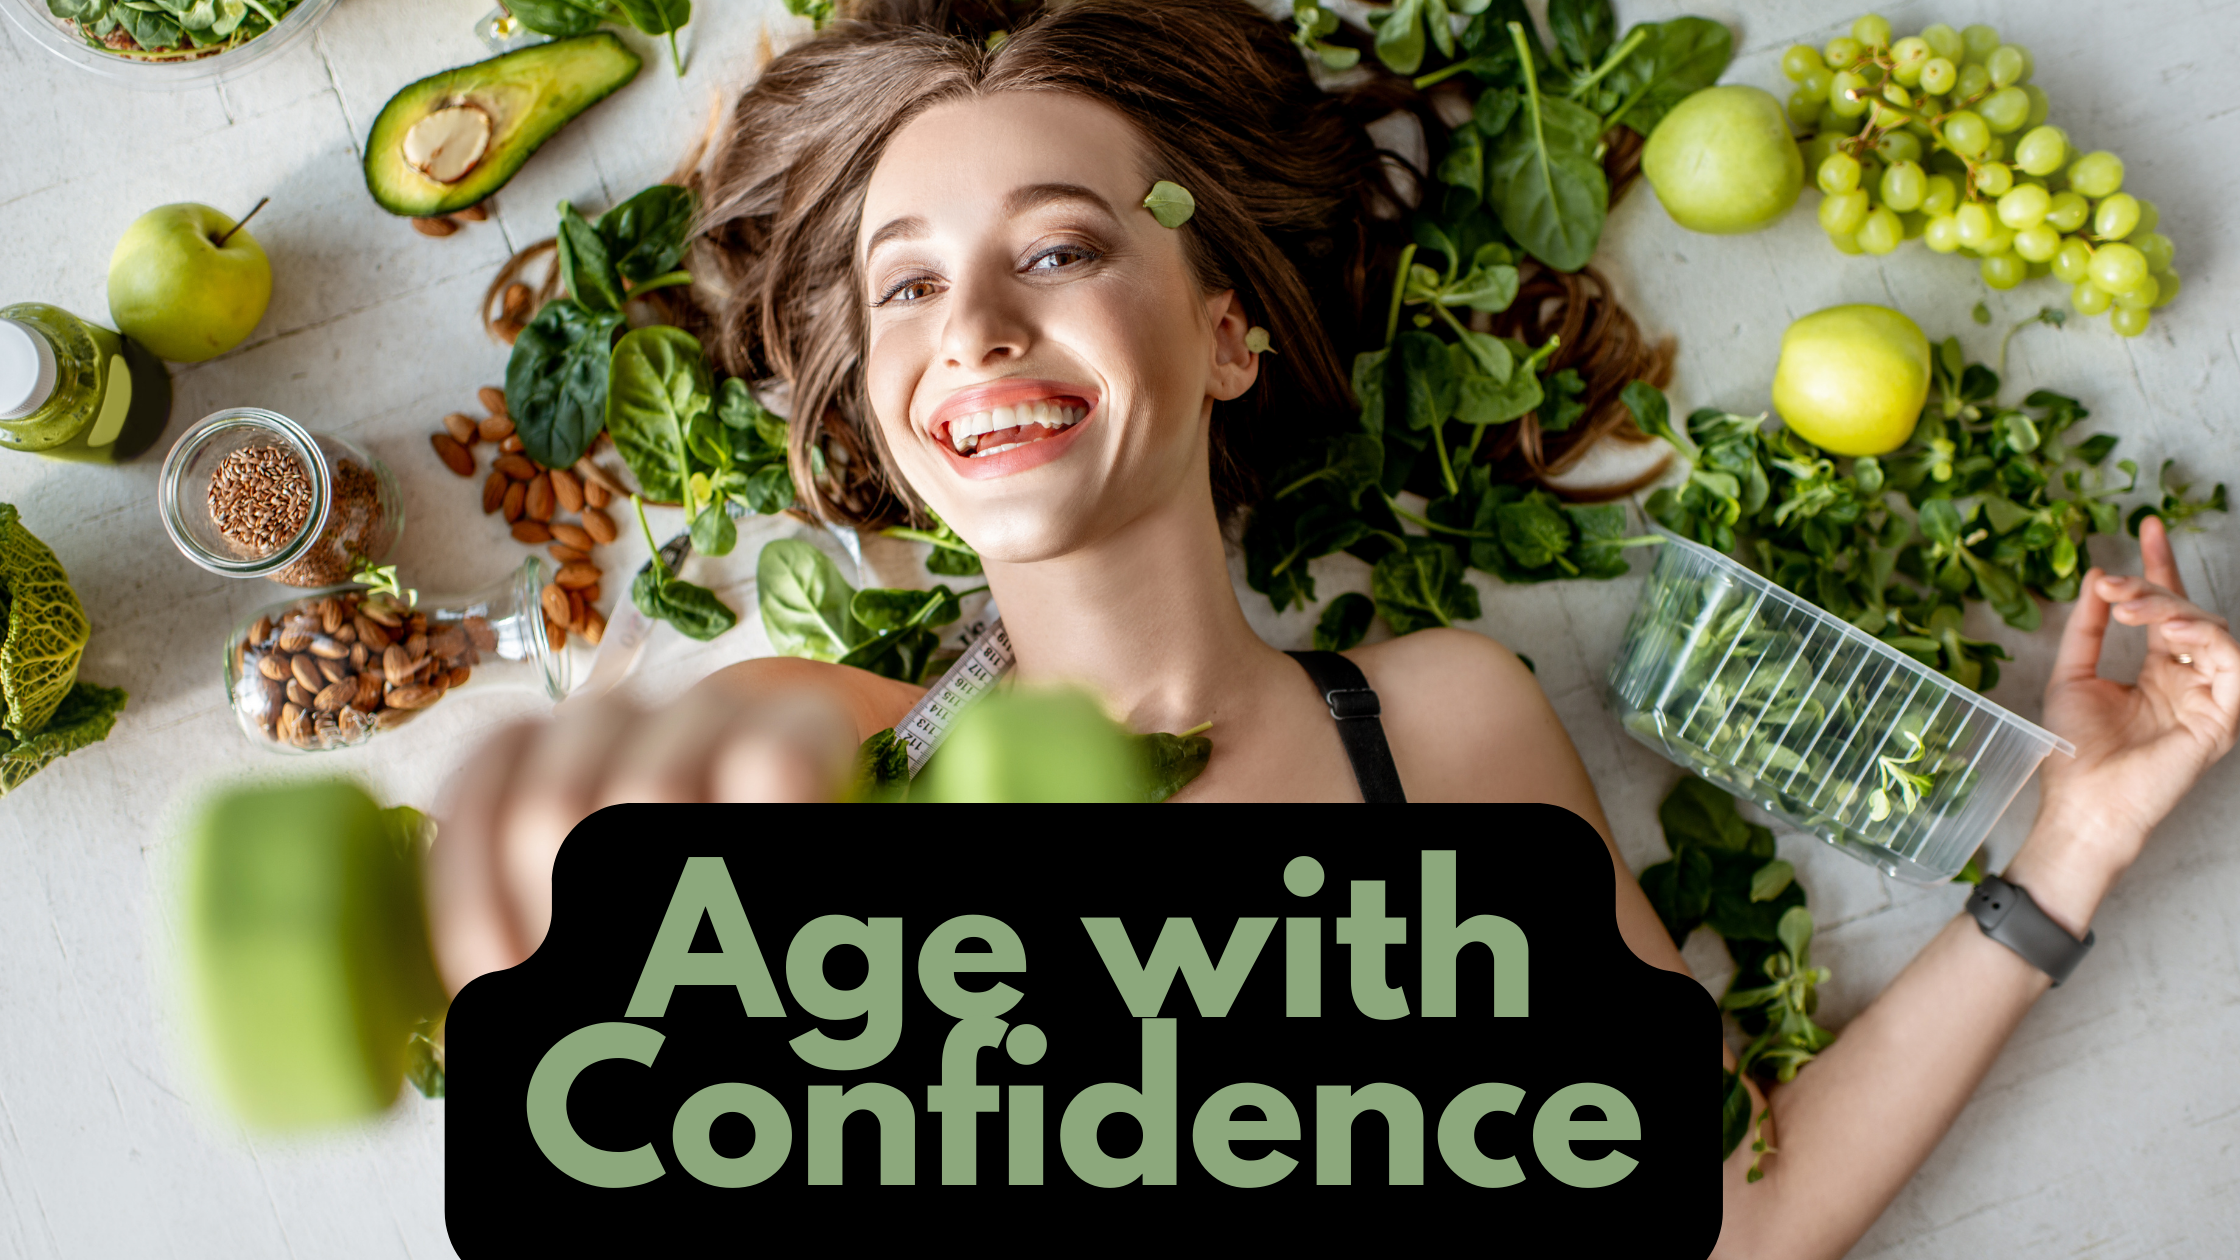 Age with confidence